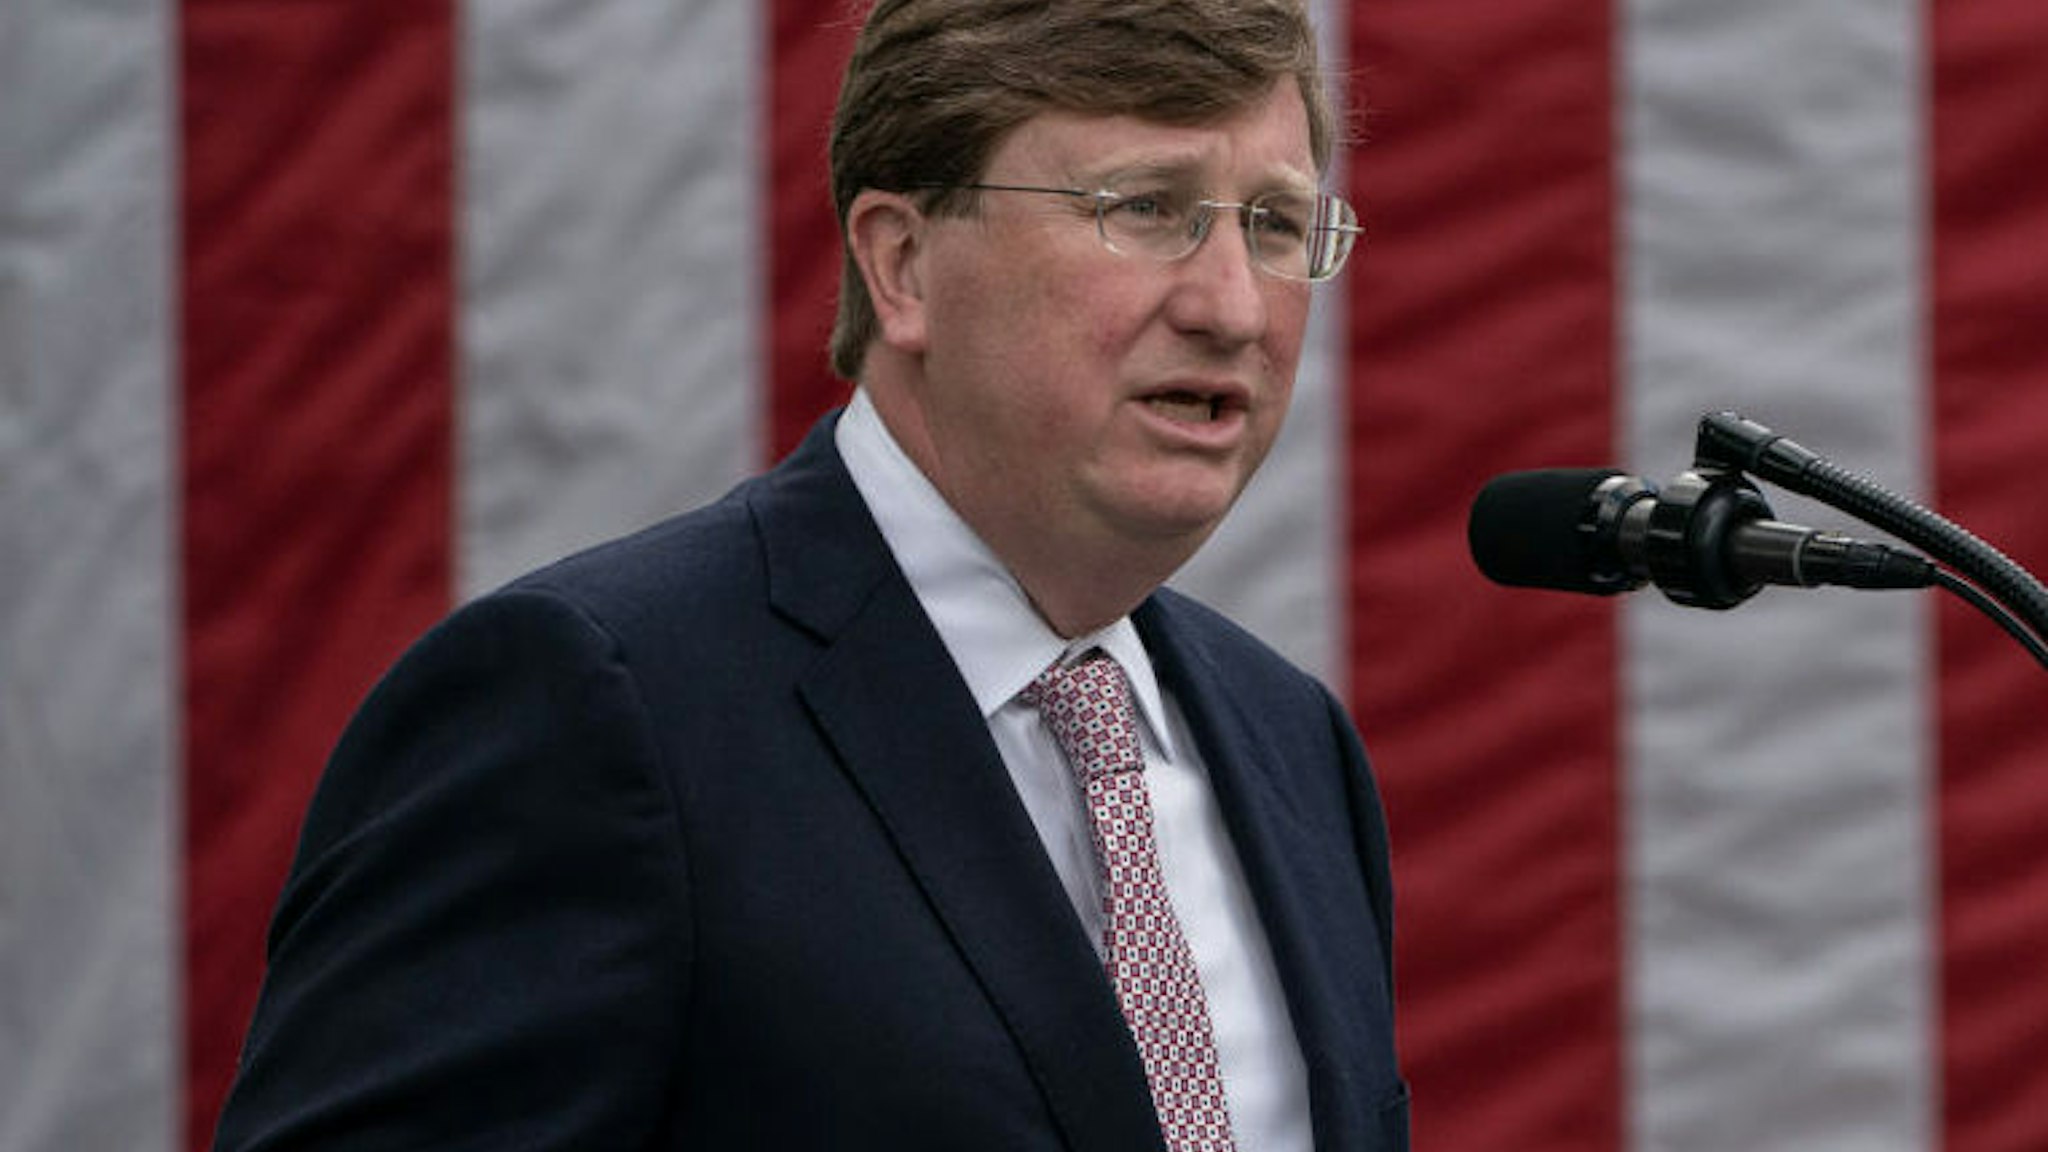 Tate Reeves, governor of Mississippi, speaks during an event in the Rose Garden of the White House in Washington, D.C., U.S., on Monday, Sept. 28, 2020. President Donald Trump is set to announce the government will send millions of rapid-result Covid-19 tests to states, and urge that they be used in schools. Photographer: